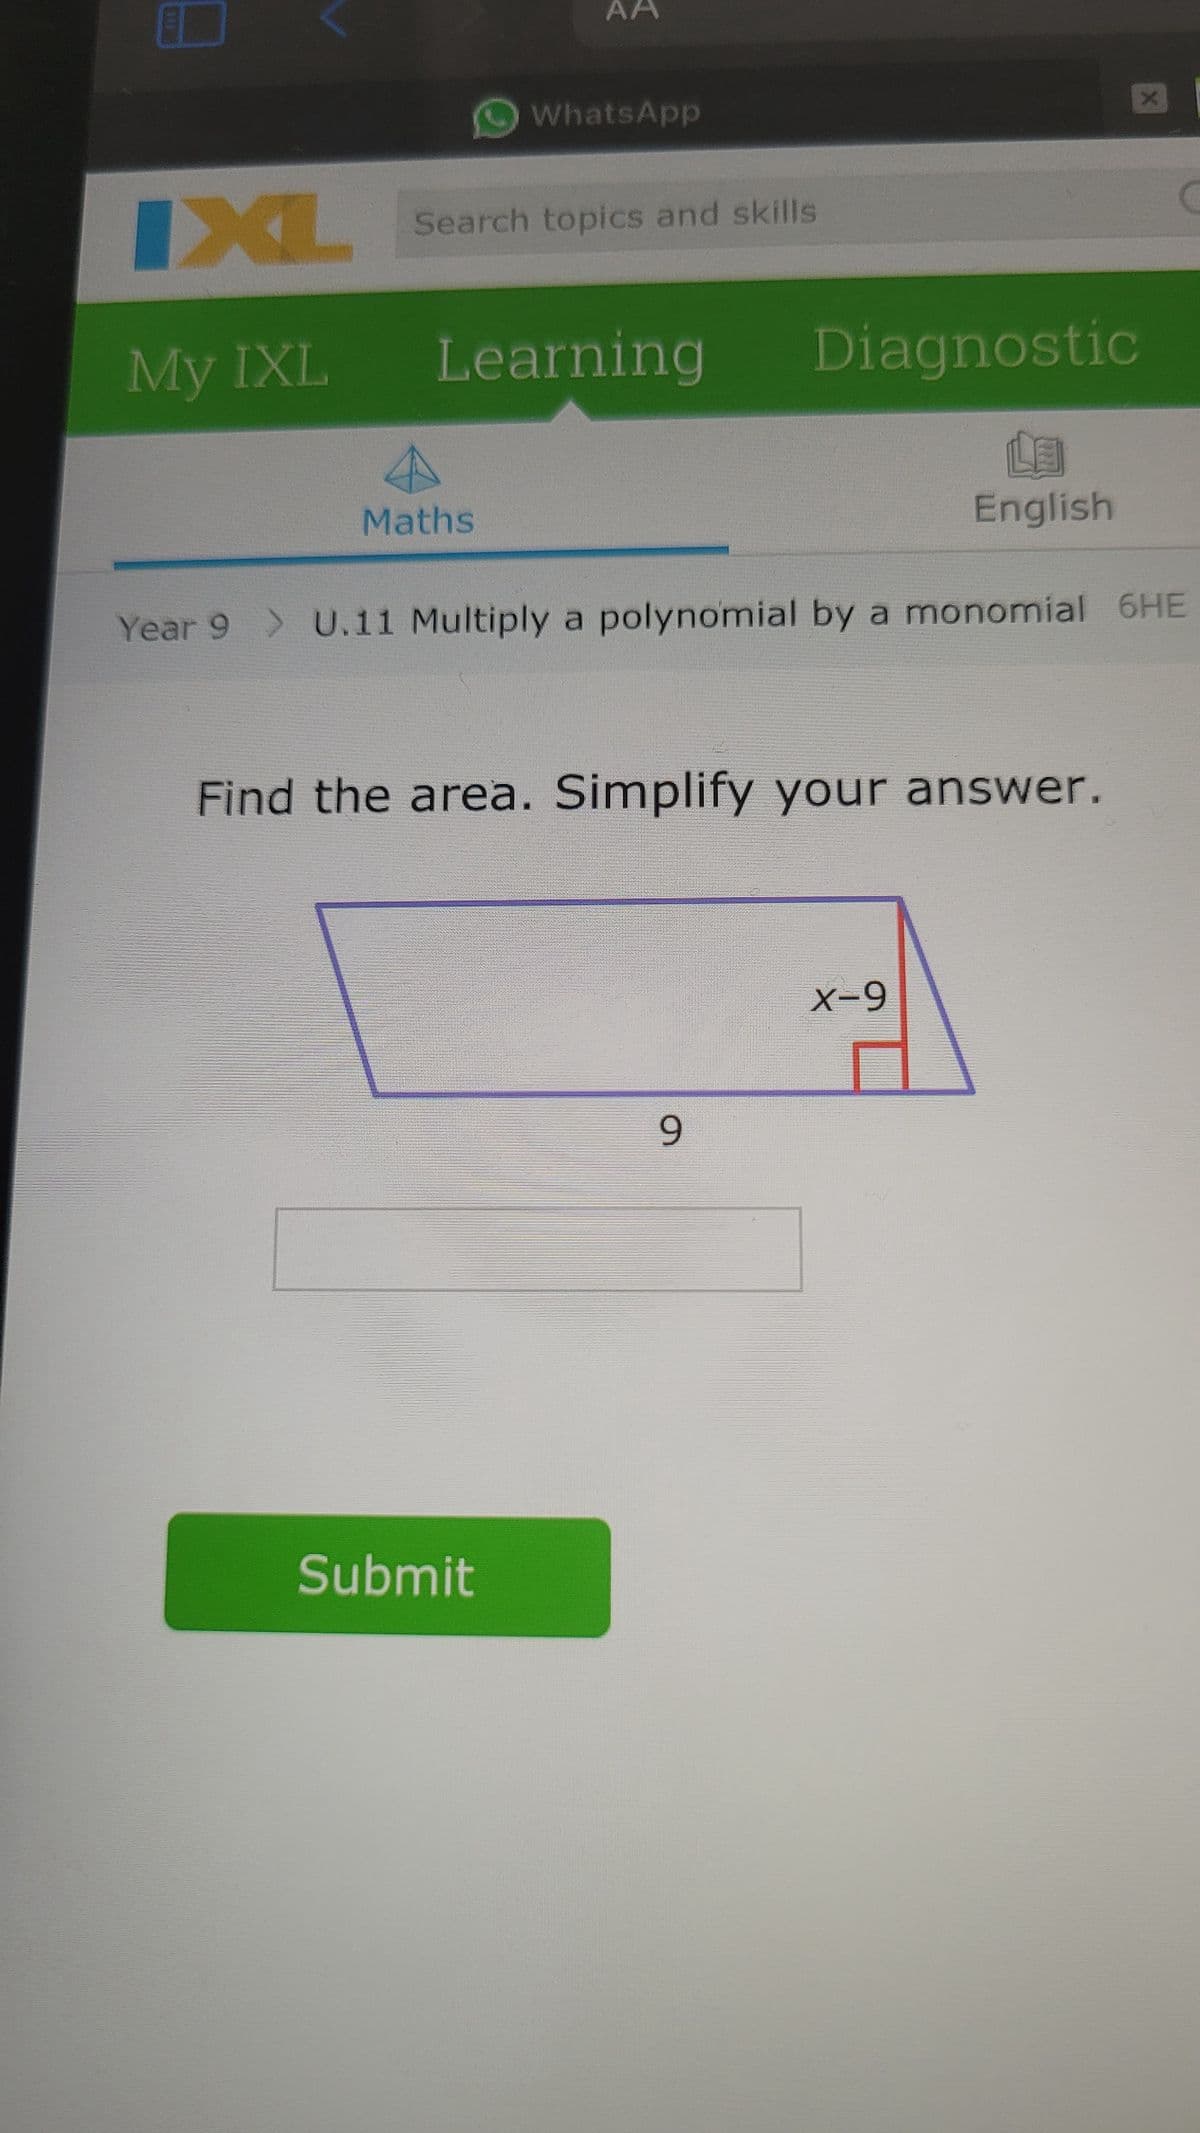 IXL
My IXL
AA
Search topics and skills
Maths
WhatsApp
Learning
Submit
Diagnostic
LE
English
Year 9 > U.11 Multiply a polynomial by a monomial 6HE
Find the area. Simplify your answer.
9
X
X-9